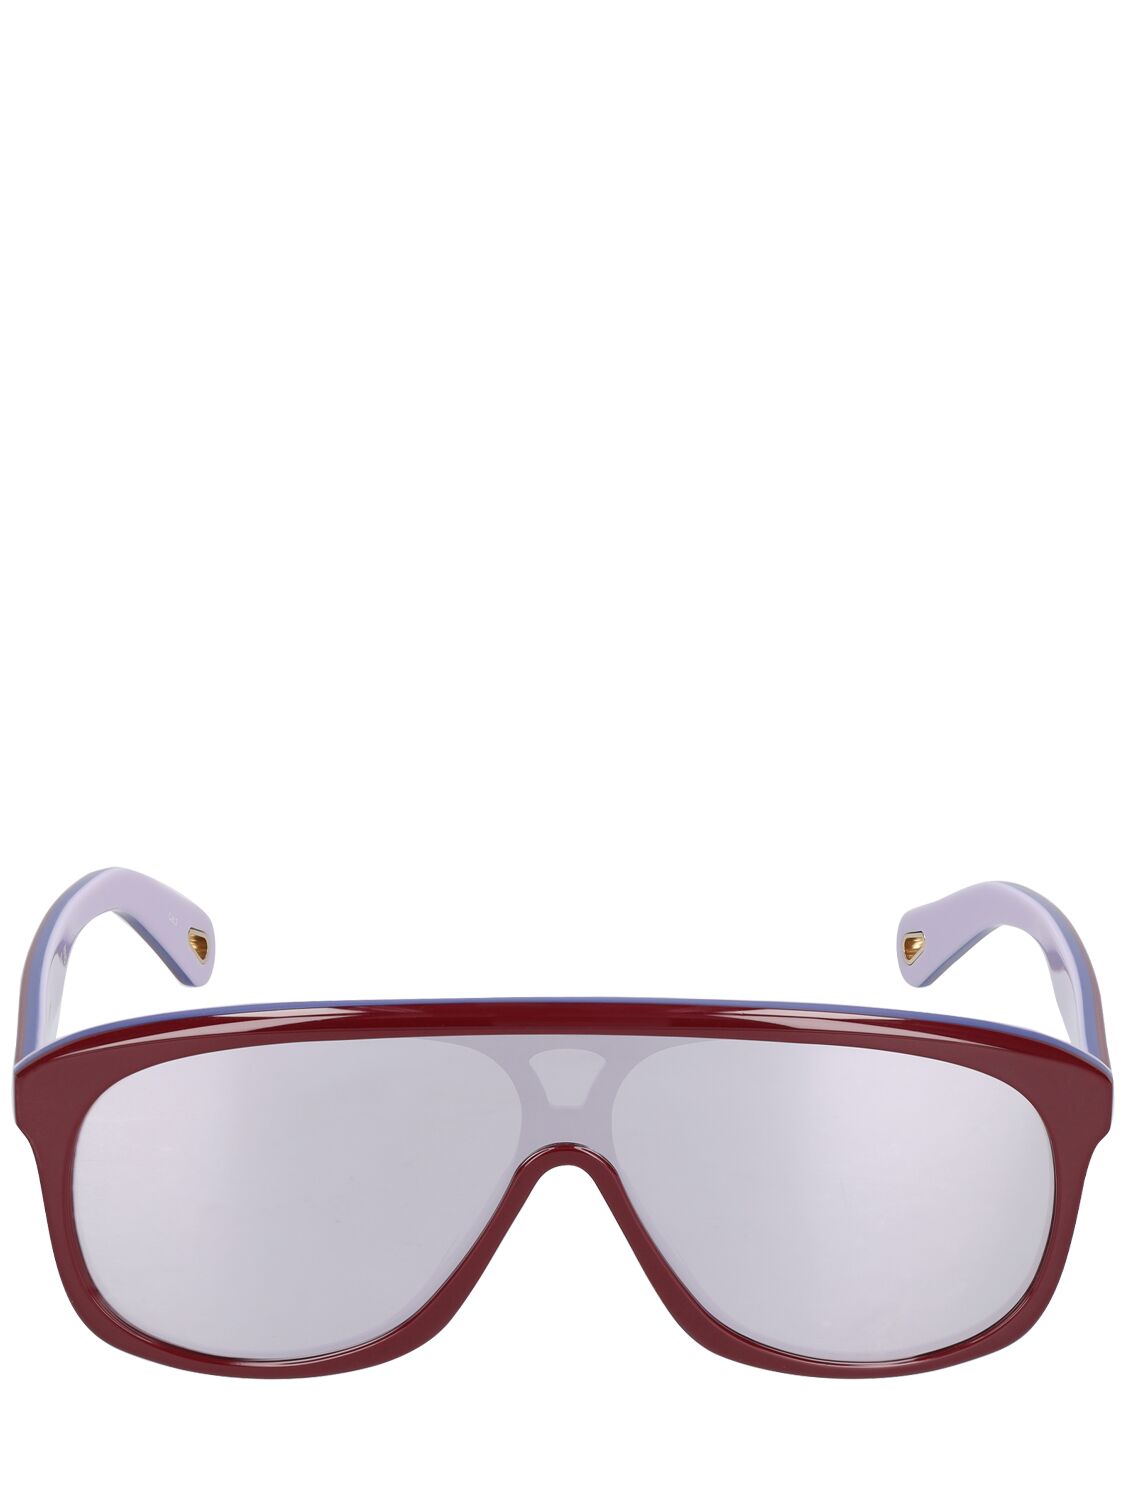 Chloé Mountaineering After Ski Sunglasses In Bordeaux,silver